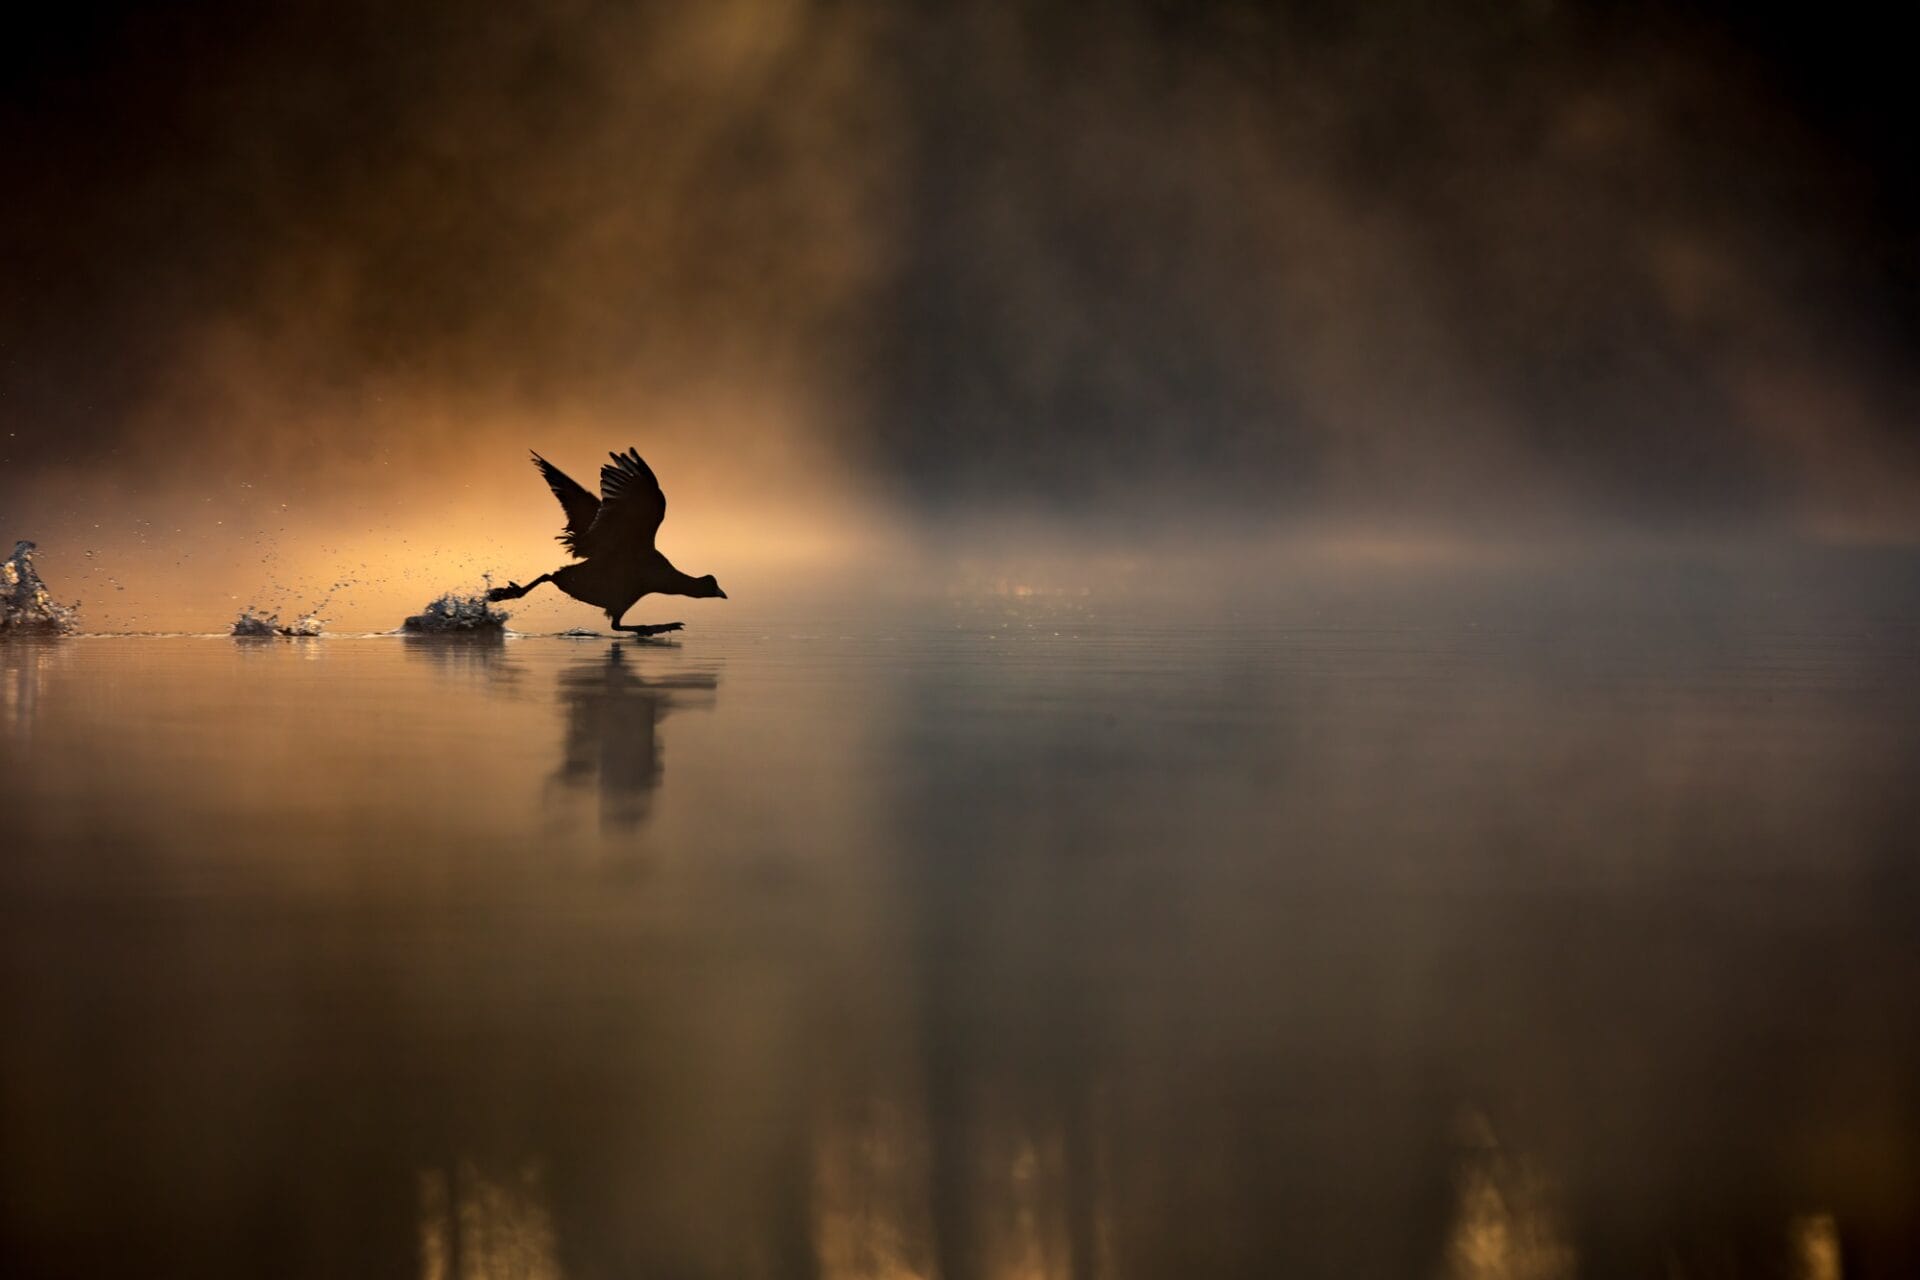 the silhouette of a coot running across the water of a misty pond